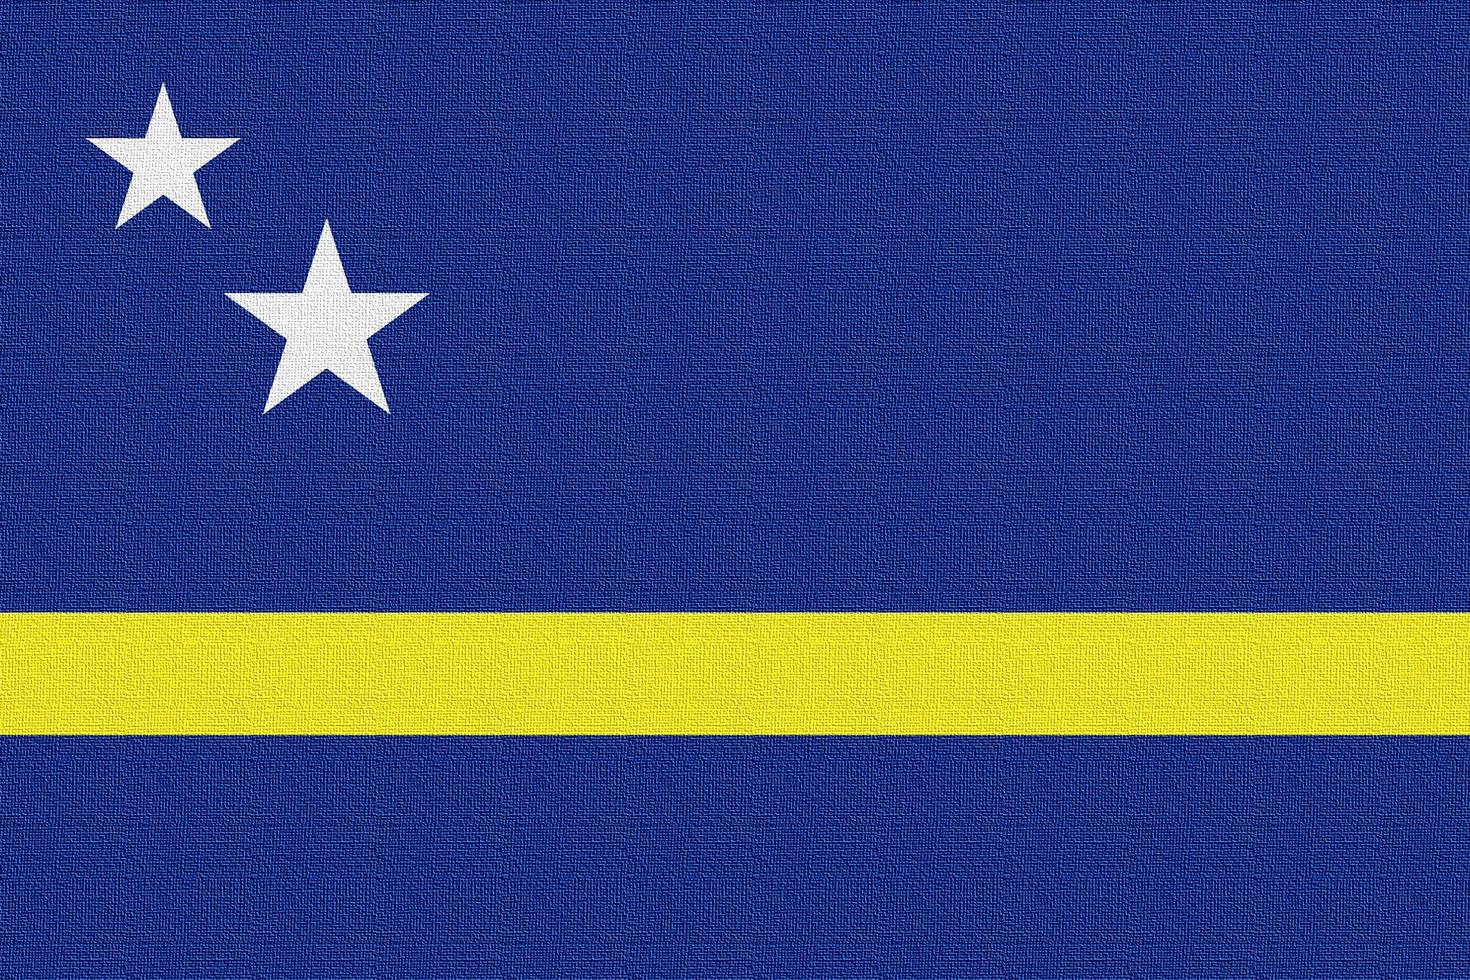 Illustration of the national flag of Curacao photo